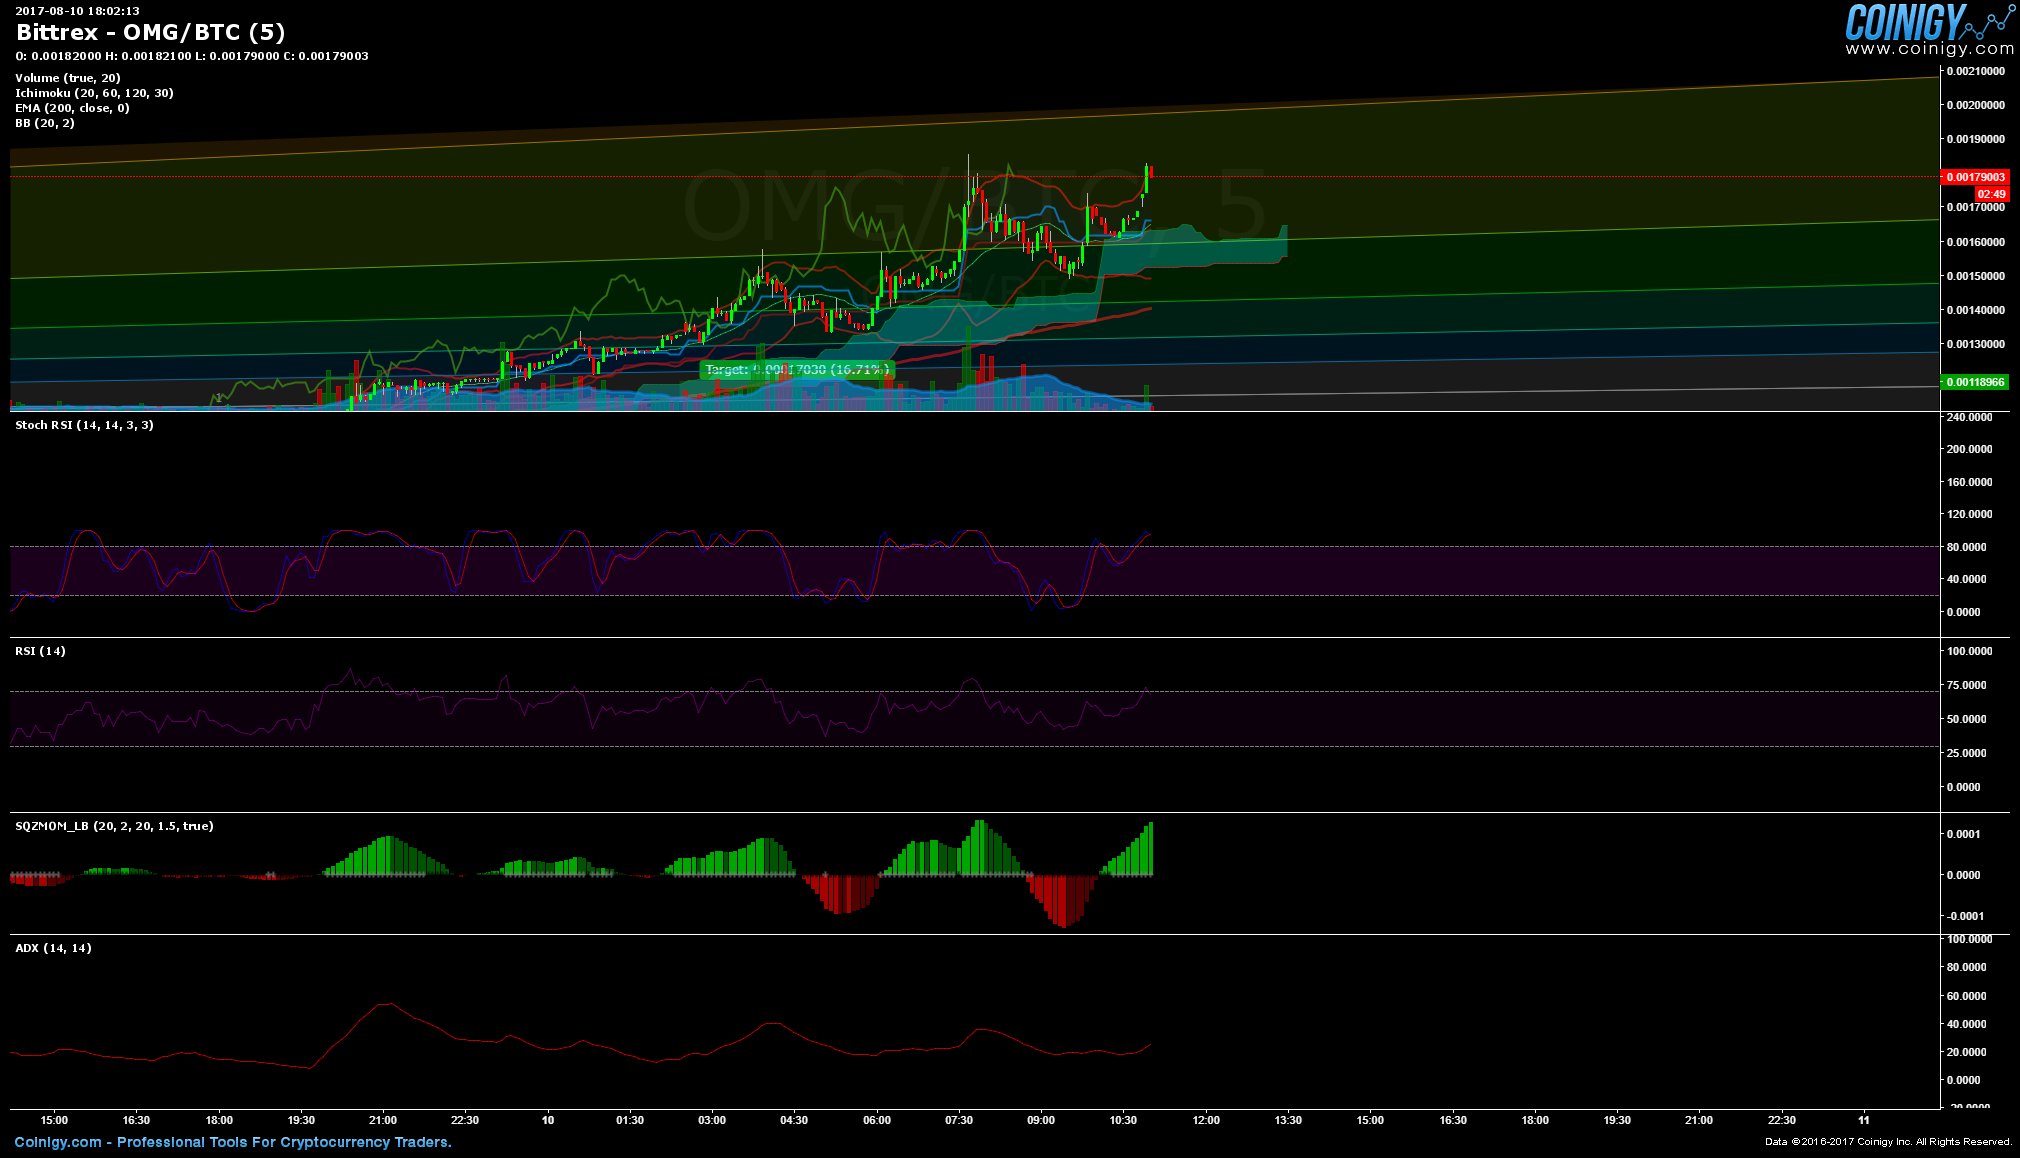 Bittrex OMG/BTC Chart - Published on Coinigy.com on August ...